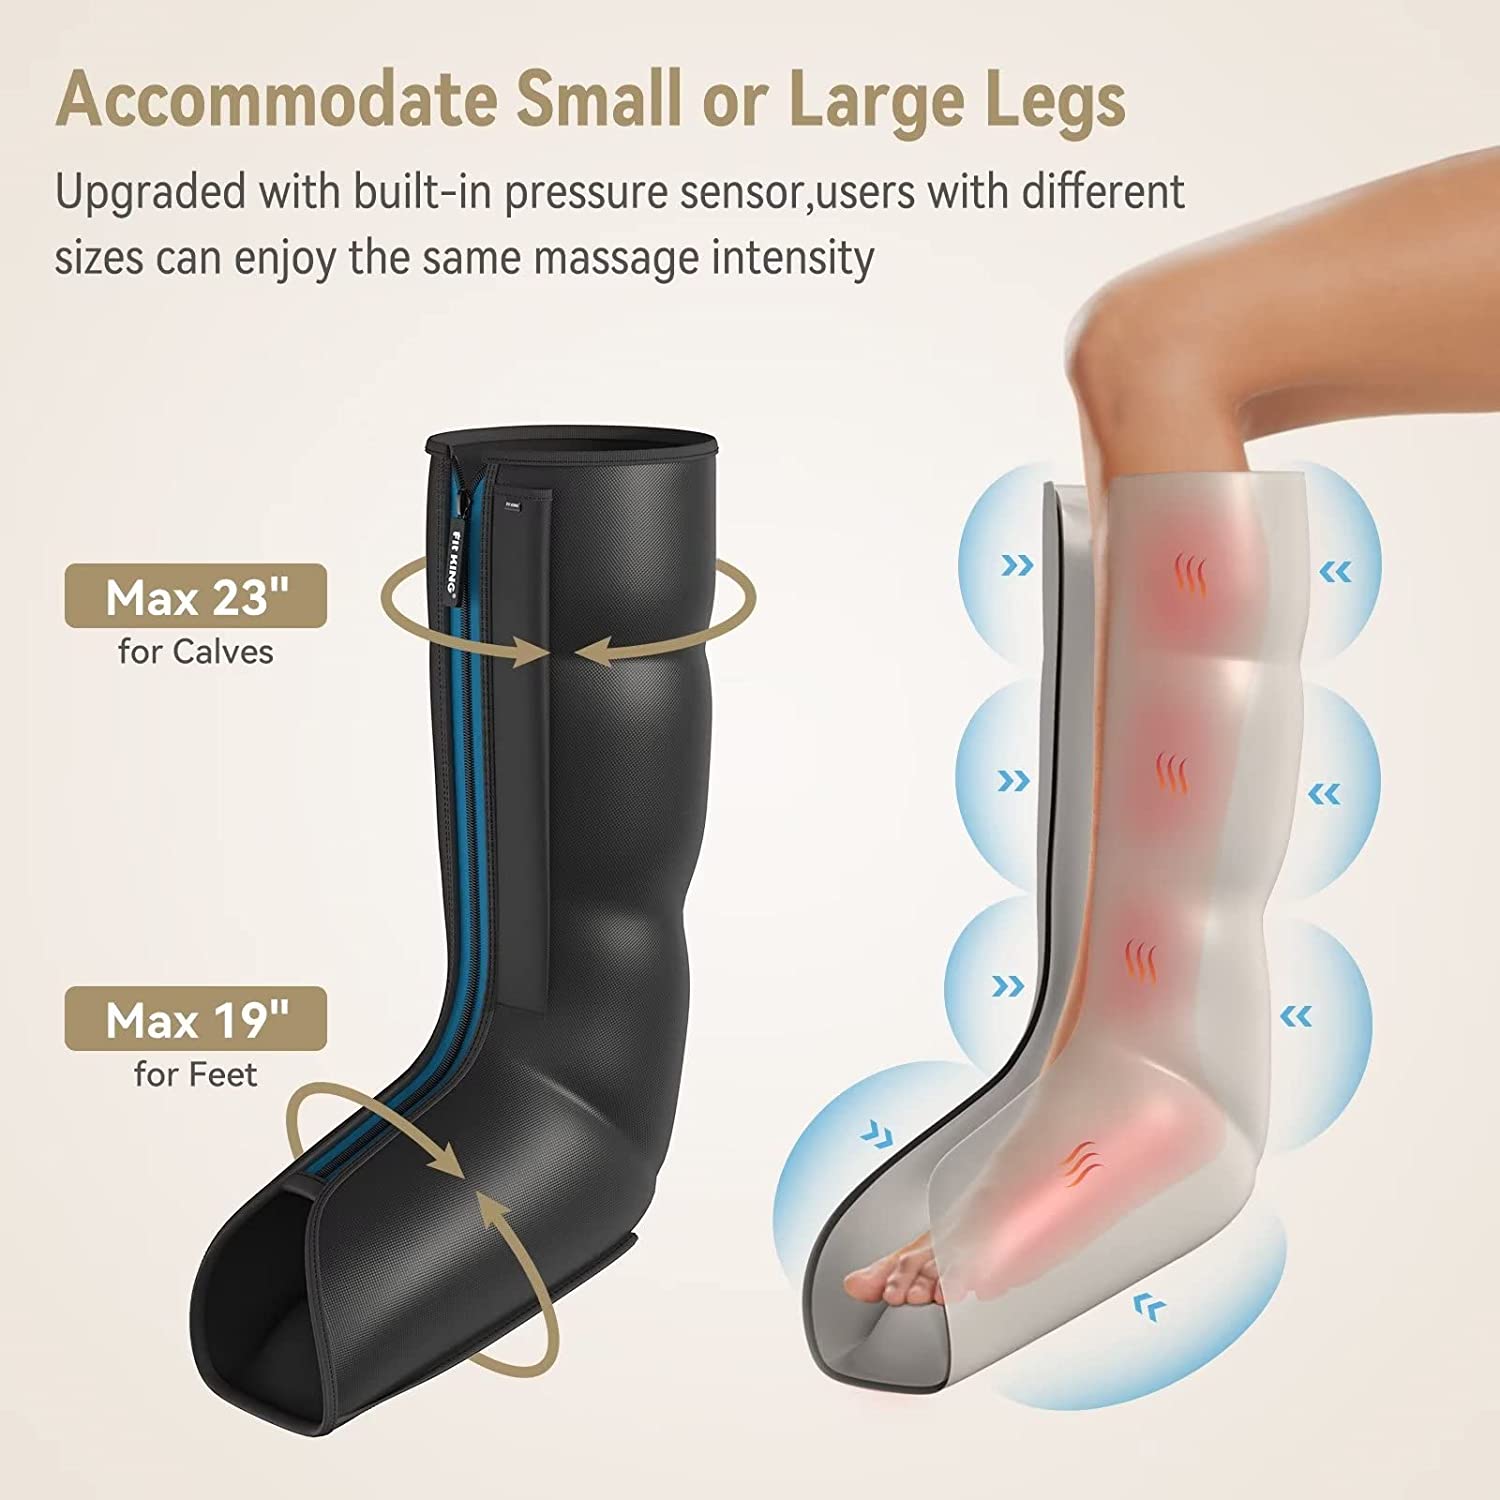 FT-081A - Upgraded Leg Massager with Heat